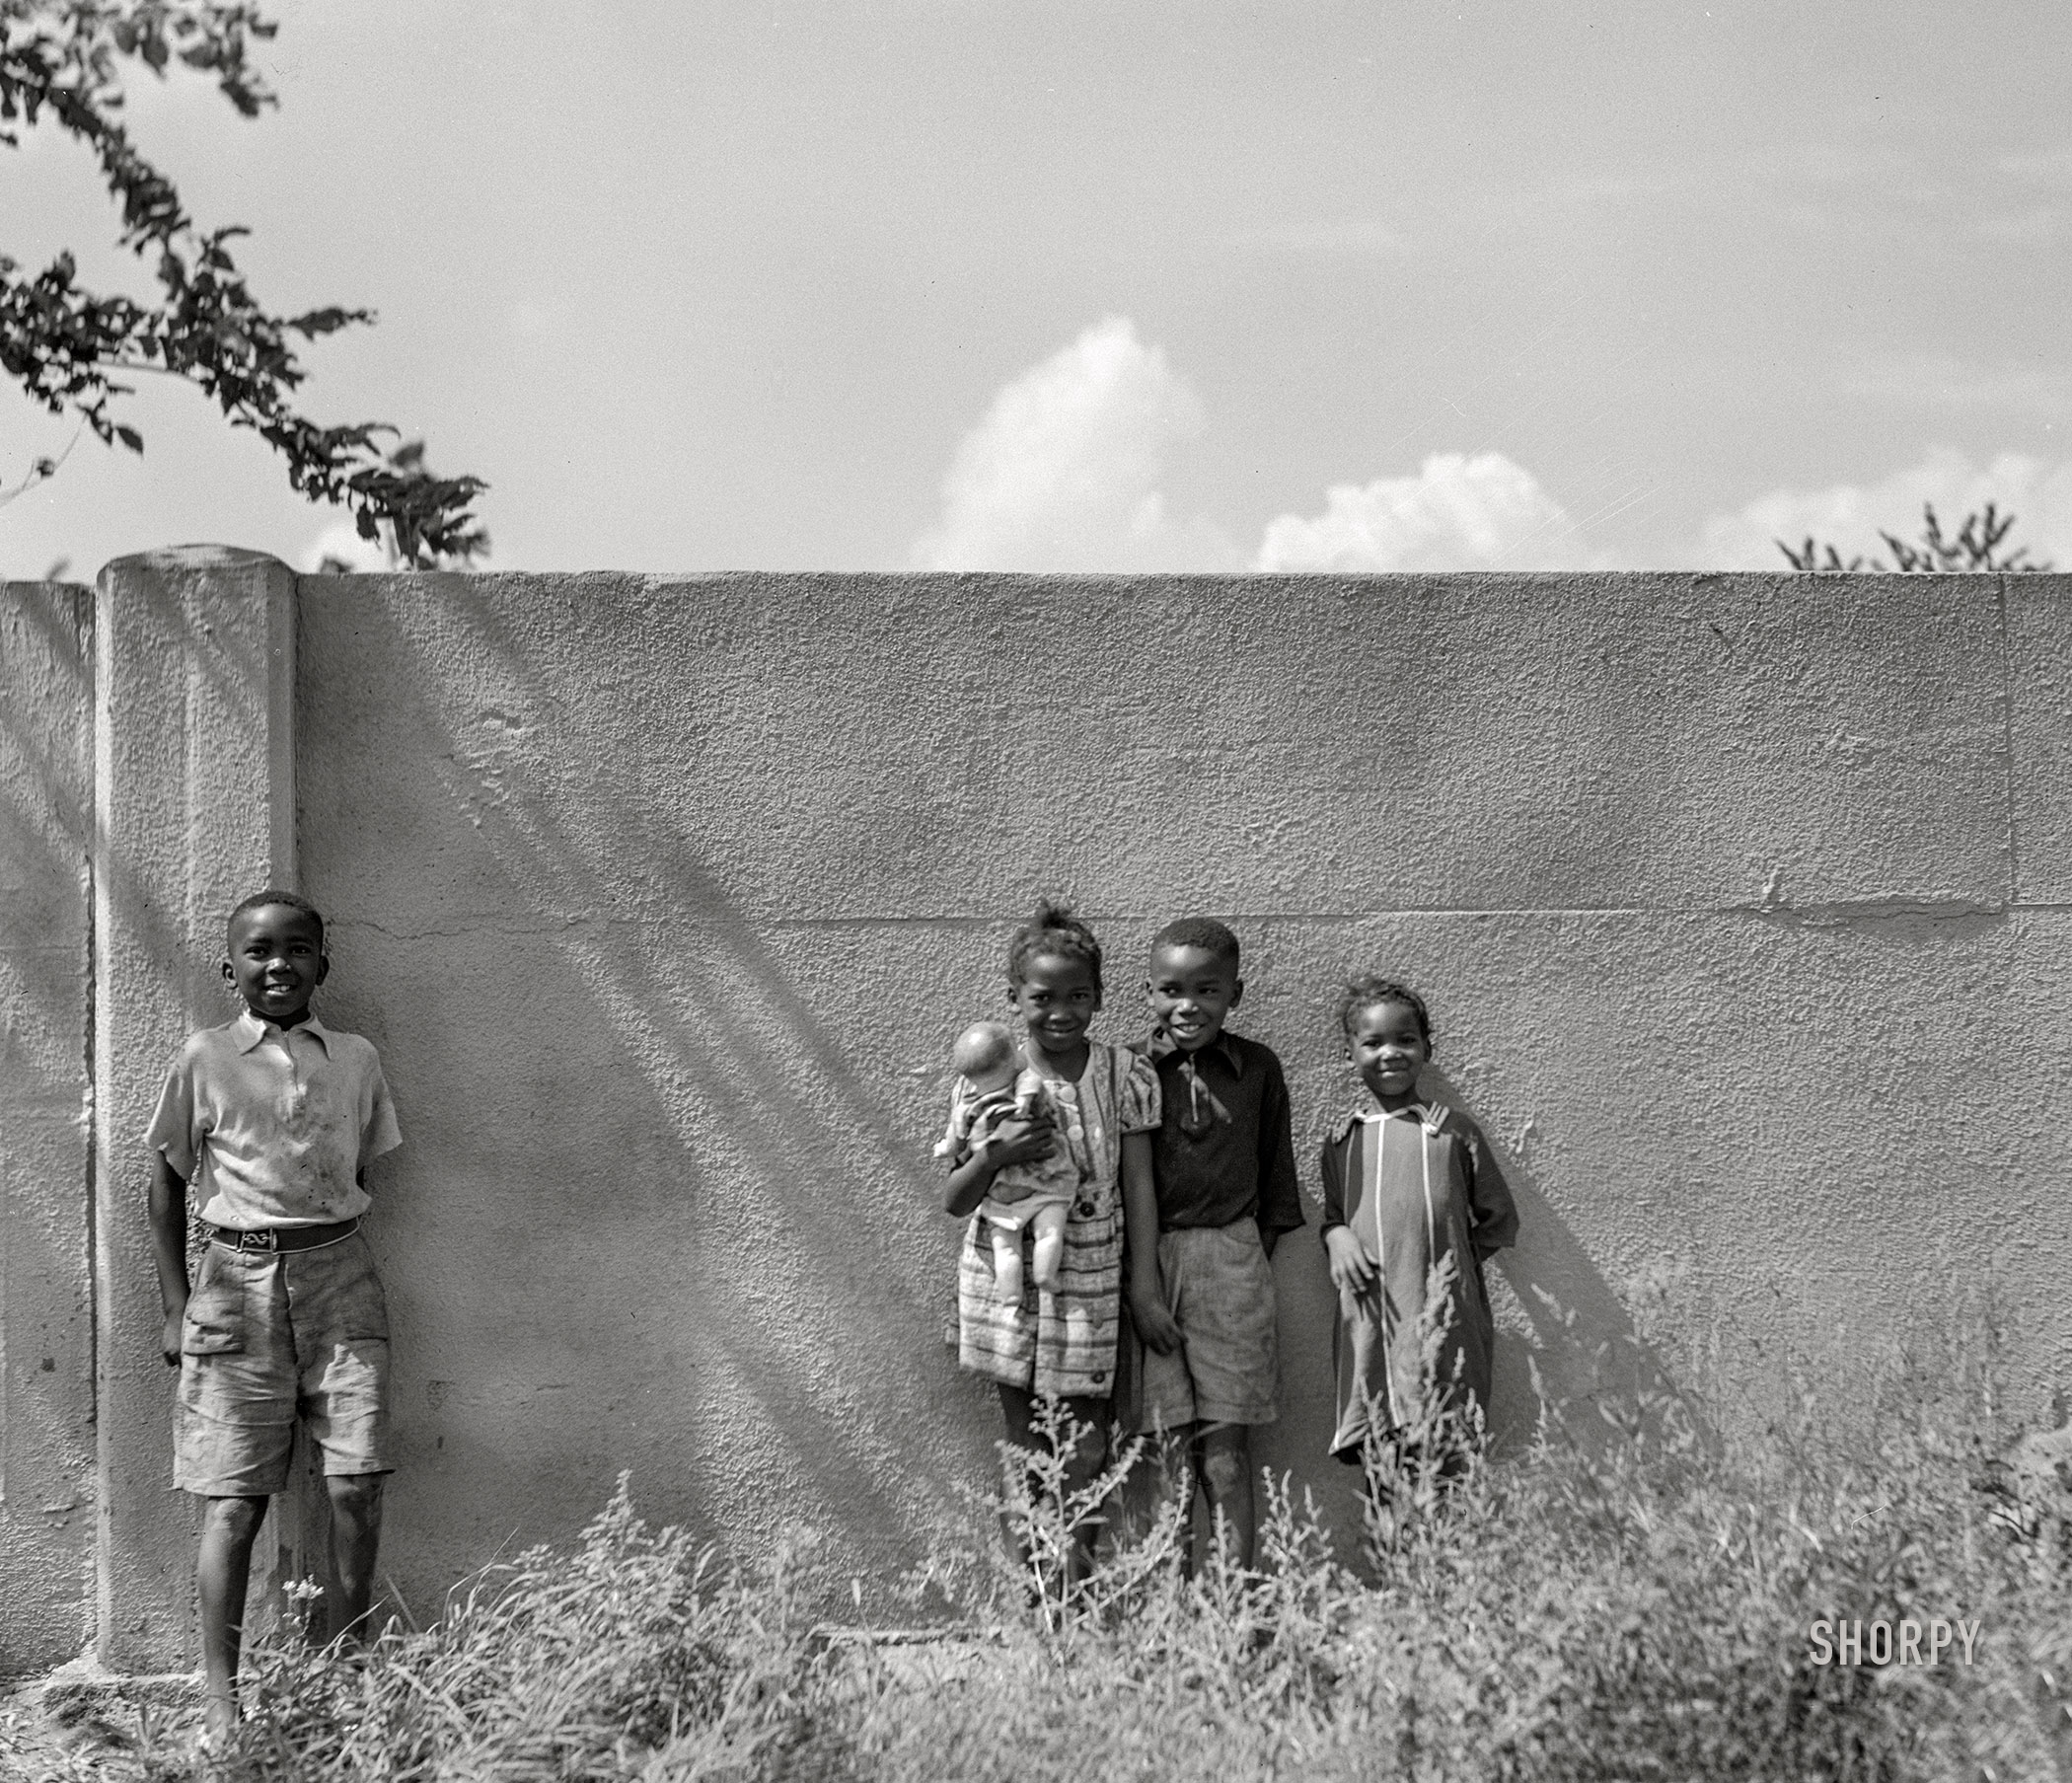 August 1941. "Negro children standing in front of half-mile concrete wall, Detroit, Michigan. This wall was built in August 1941 to separate the Negro section from a white housing development going up on the other side." Acetate negative by John Vachon. View full size.